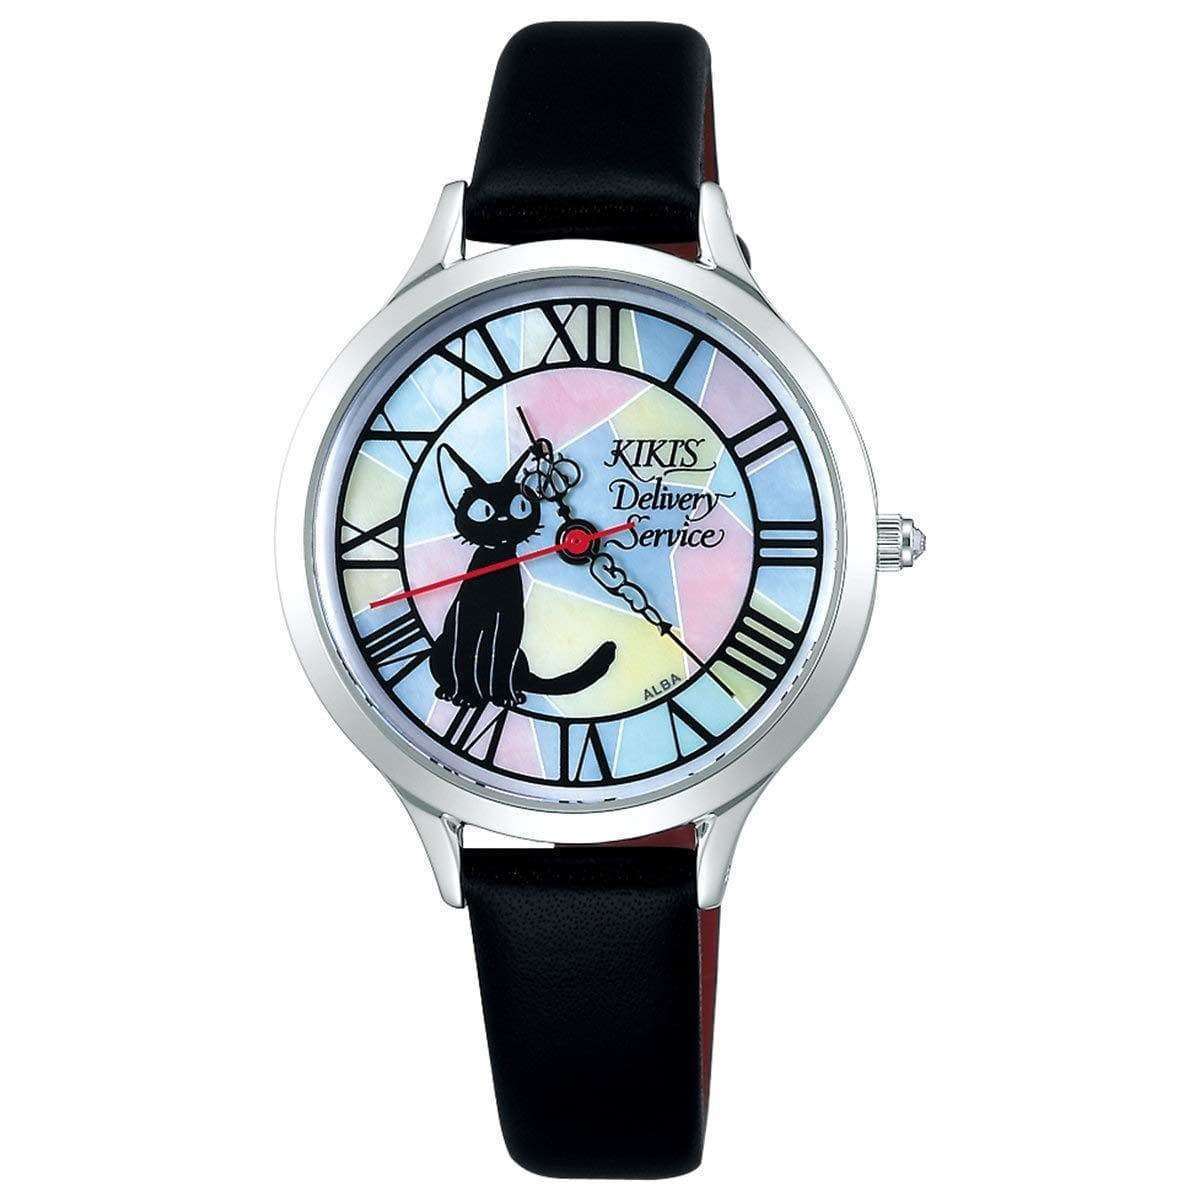 ROOK JAPAN:ALBA "Kiki's Delivery Service" The Movie 30th Anniversary Men Watch (700 LIMITED) ACCK709,Fashion Watch,ALBA(アルバ)